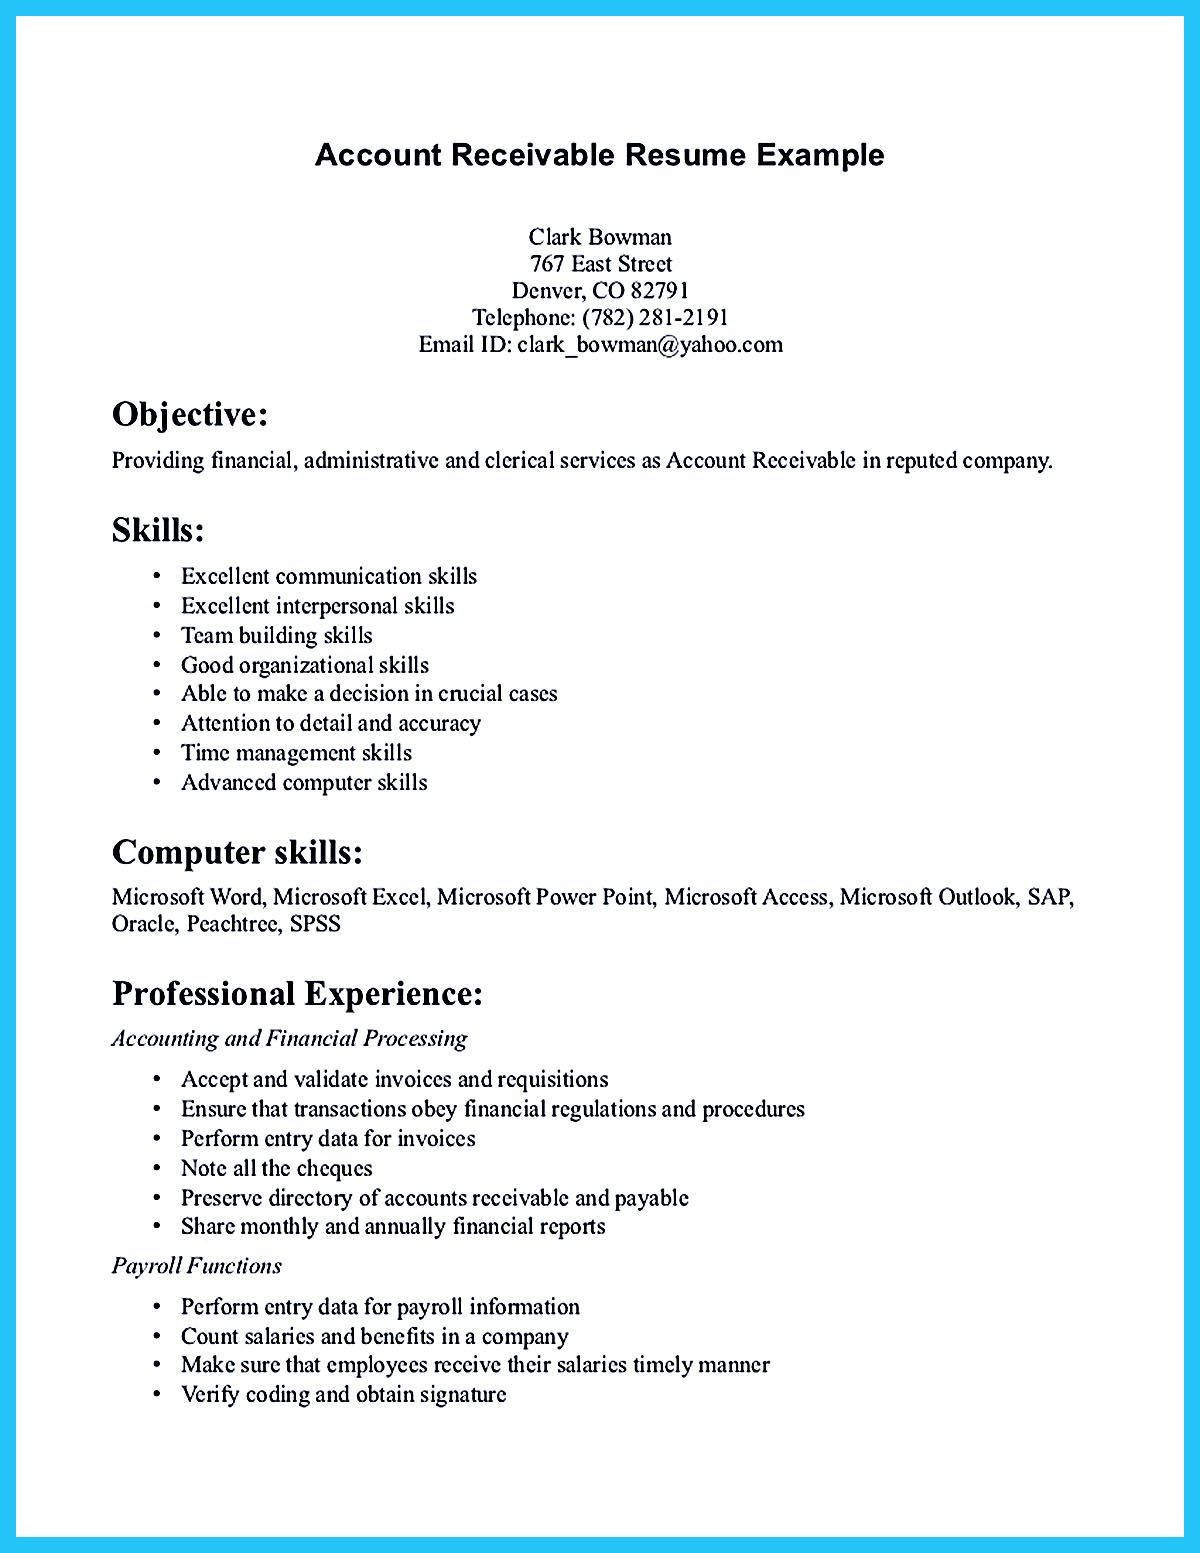 Entry Level Account Receivable Resume Sample Perfect Accounts Receivable Resume to Get Hired Immediately …